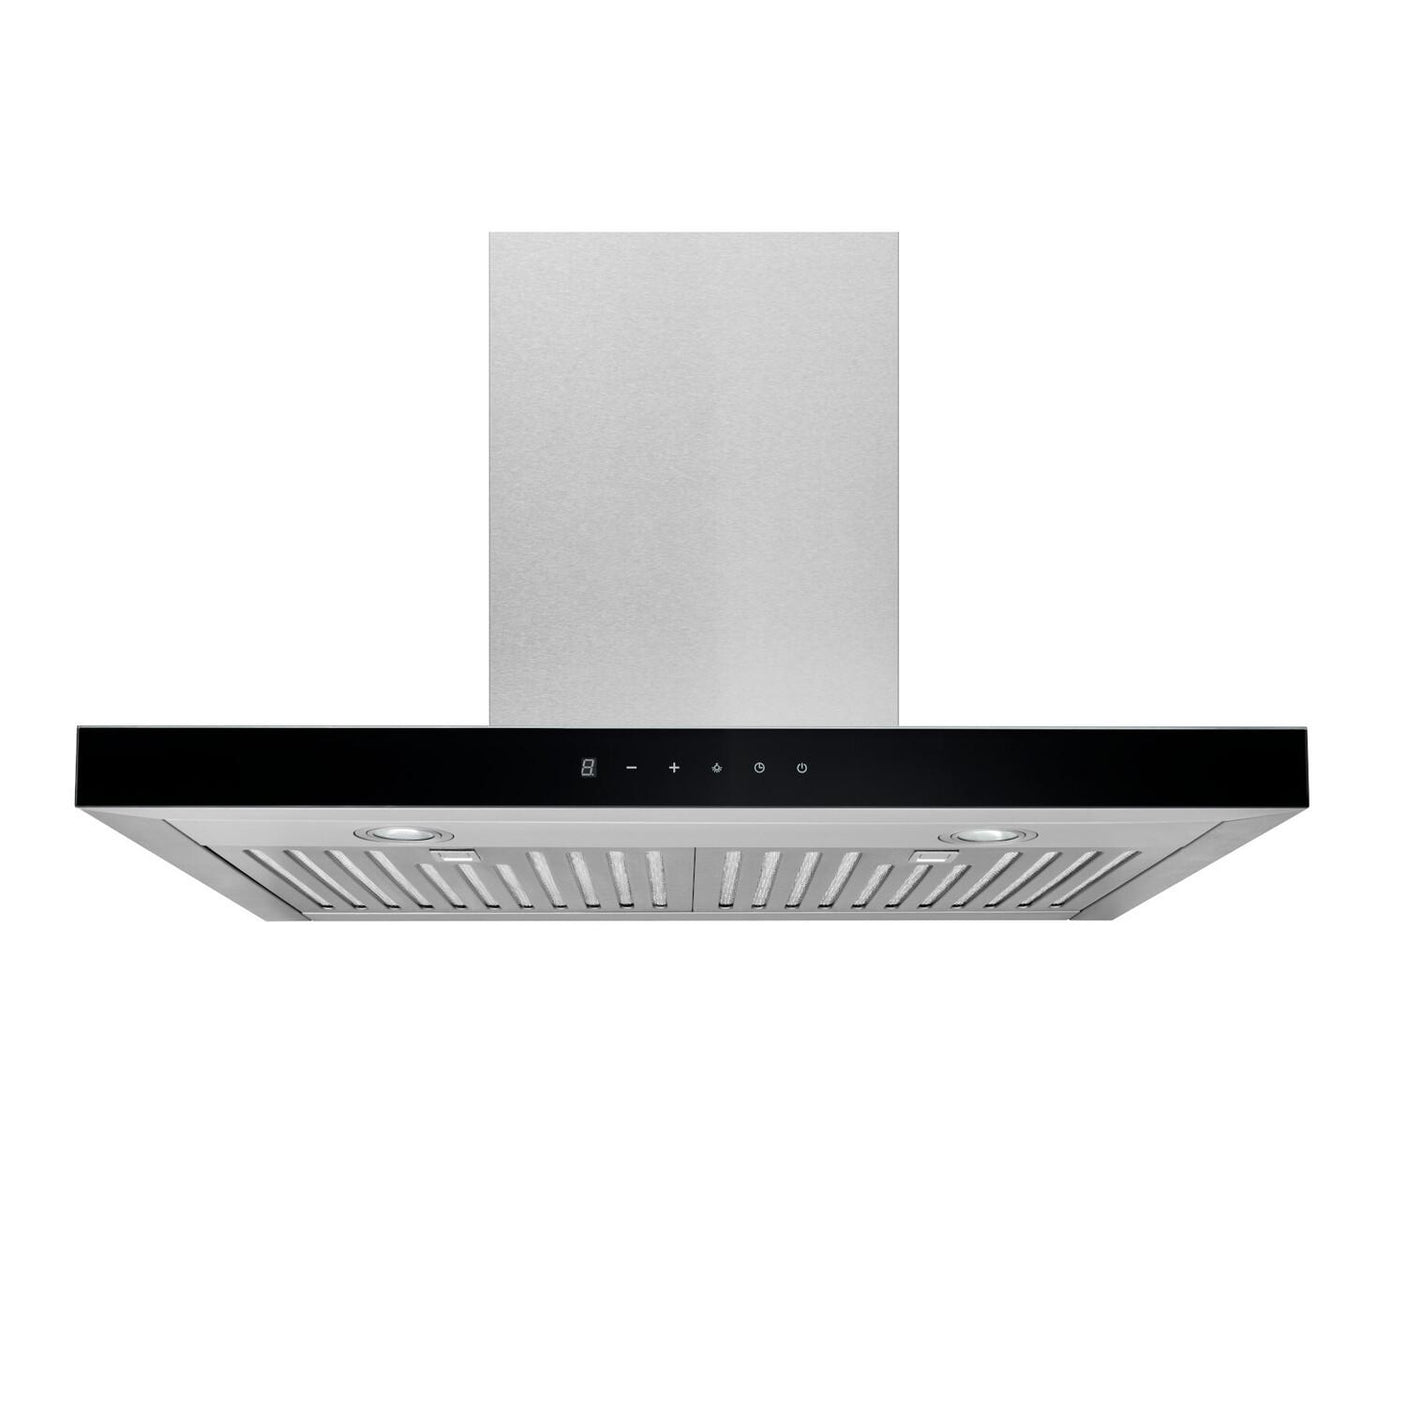 **DISCONTINUED** Broan® 30-Inch Convertible Wall-Mount T-Style Chimney Range Hood, 450 MAX CFM, Stainless Steel